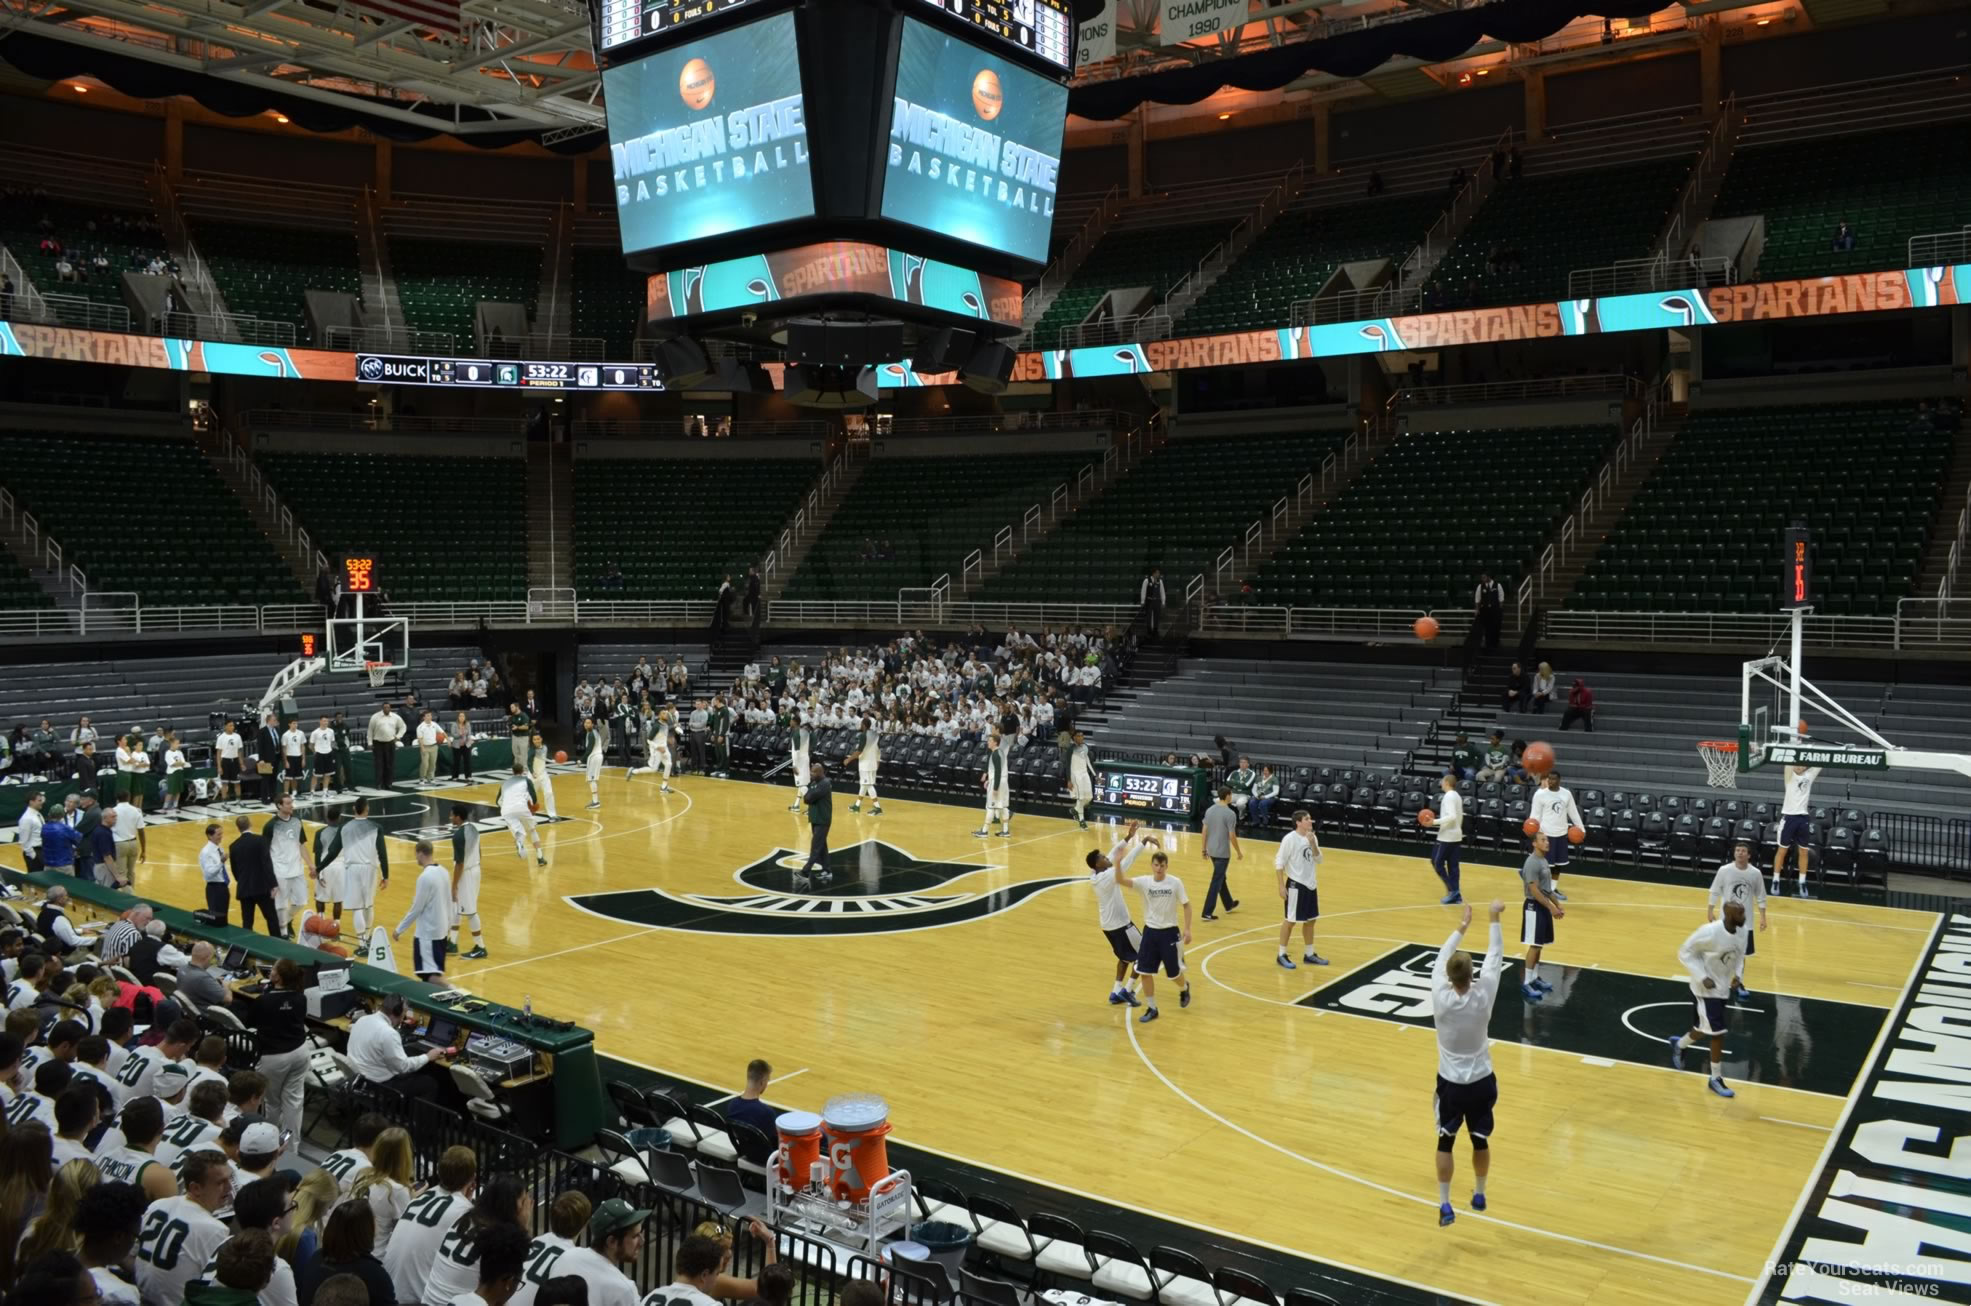 section 109, row 13 seat view  - breslin center